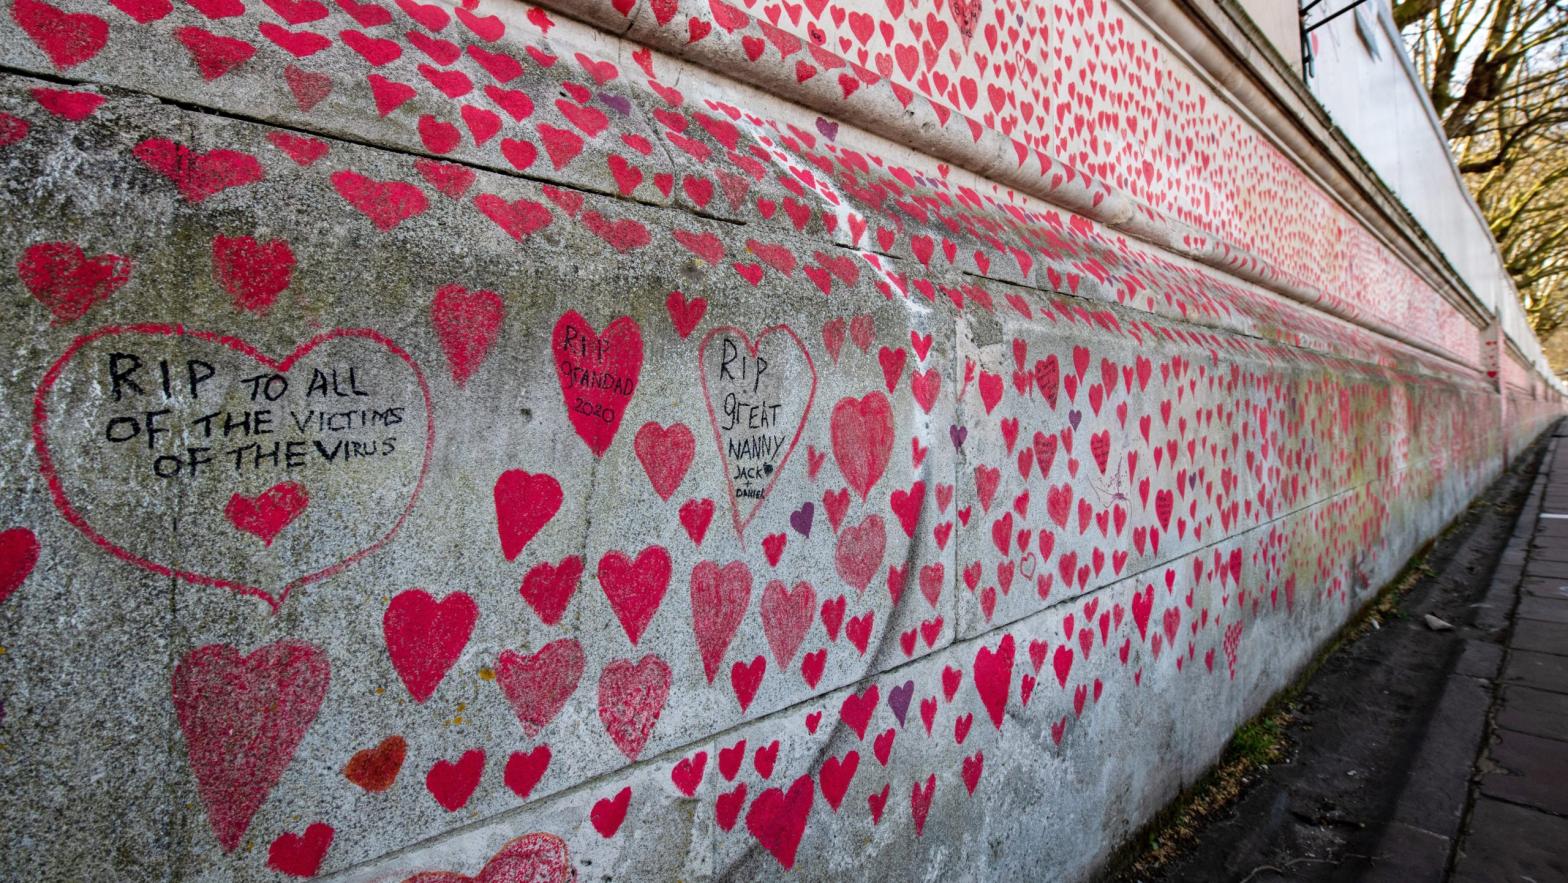 A covid-19 memorial wall in London, England on April 6, 2021. (Photo: Chris J Ratcliffe For Covid-19 Bereaved Families For Justice, Getty Images)